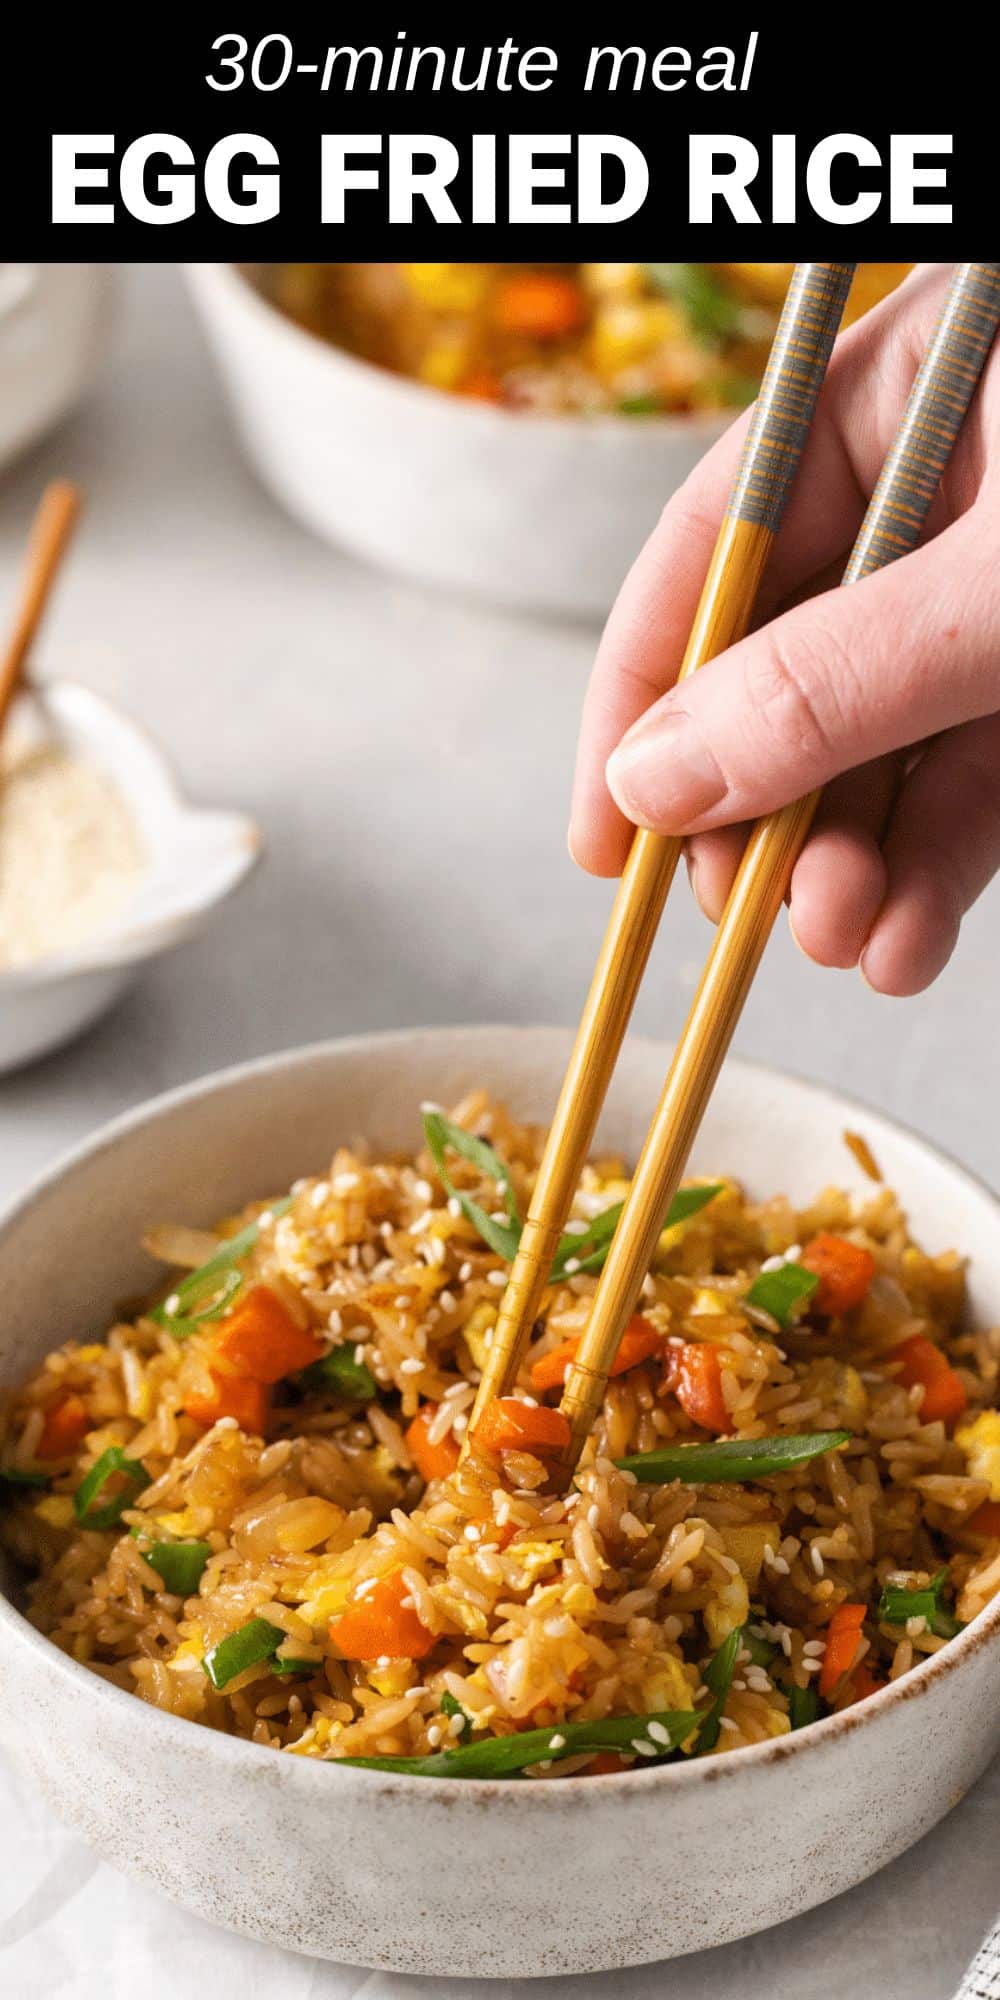 This easy Egg Fried Rice recipe is a delicious, classic stir-fry dish featuring light and fluffy rice, filled with scrambled eggs and tender veggies. It’s a super quick and simple to make recipe that can be served as a main course or a hearty and filling side dish.